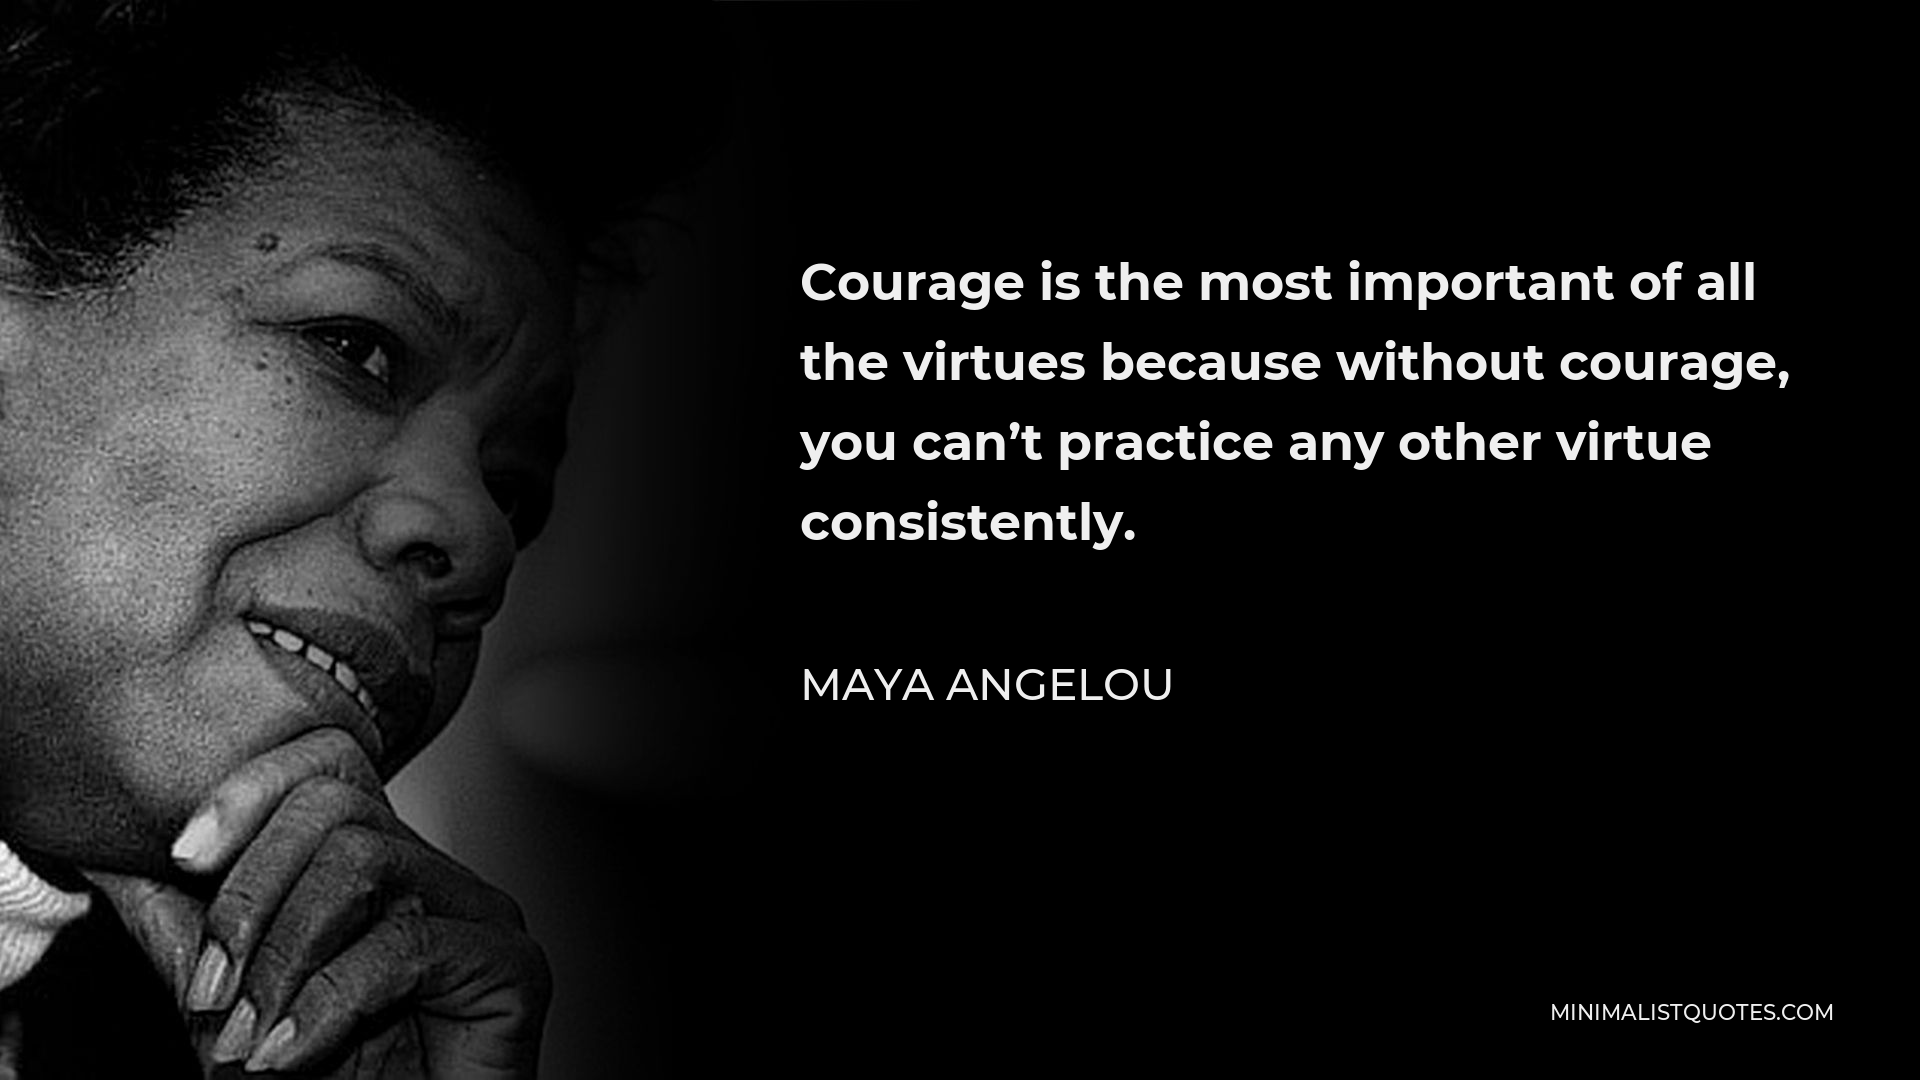 Maya Angelou Quote - Courage is the most important of all the virtues because without courage, you can’t practice any other virtue consistently.